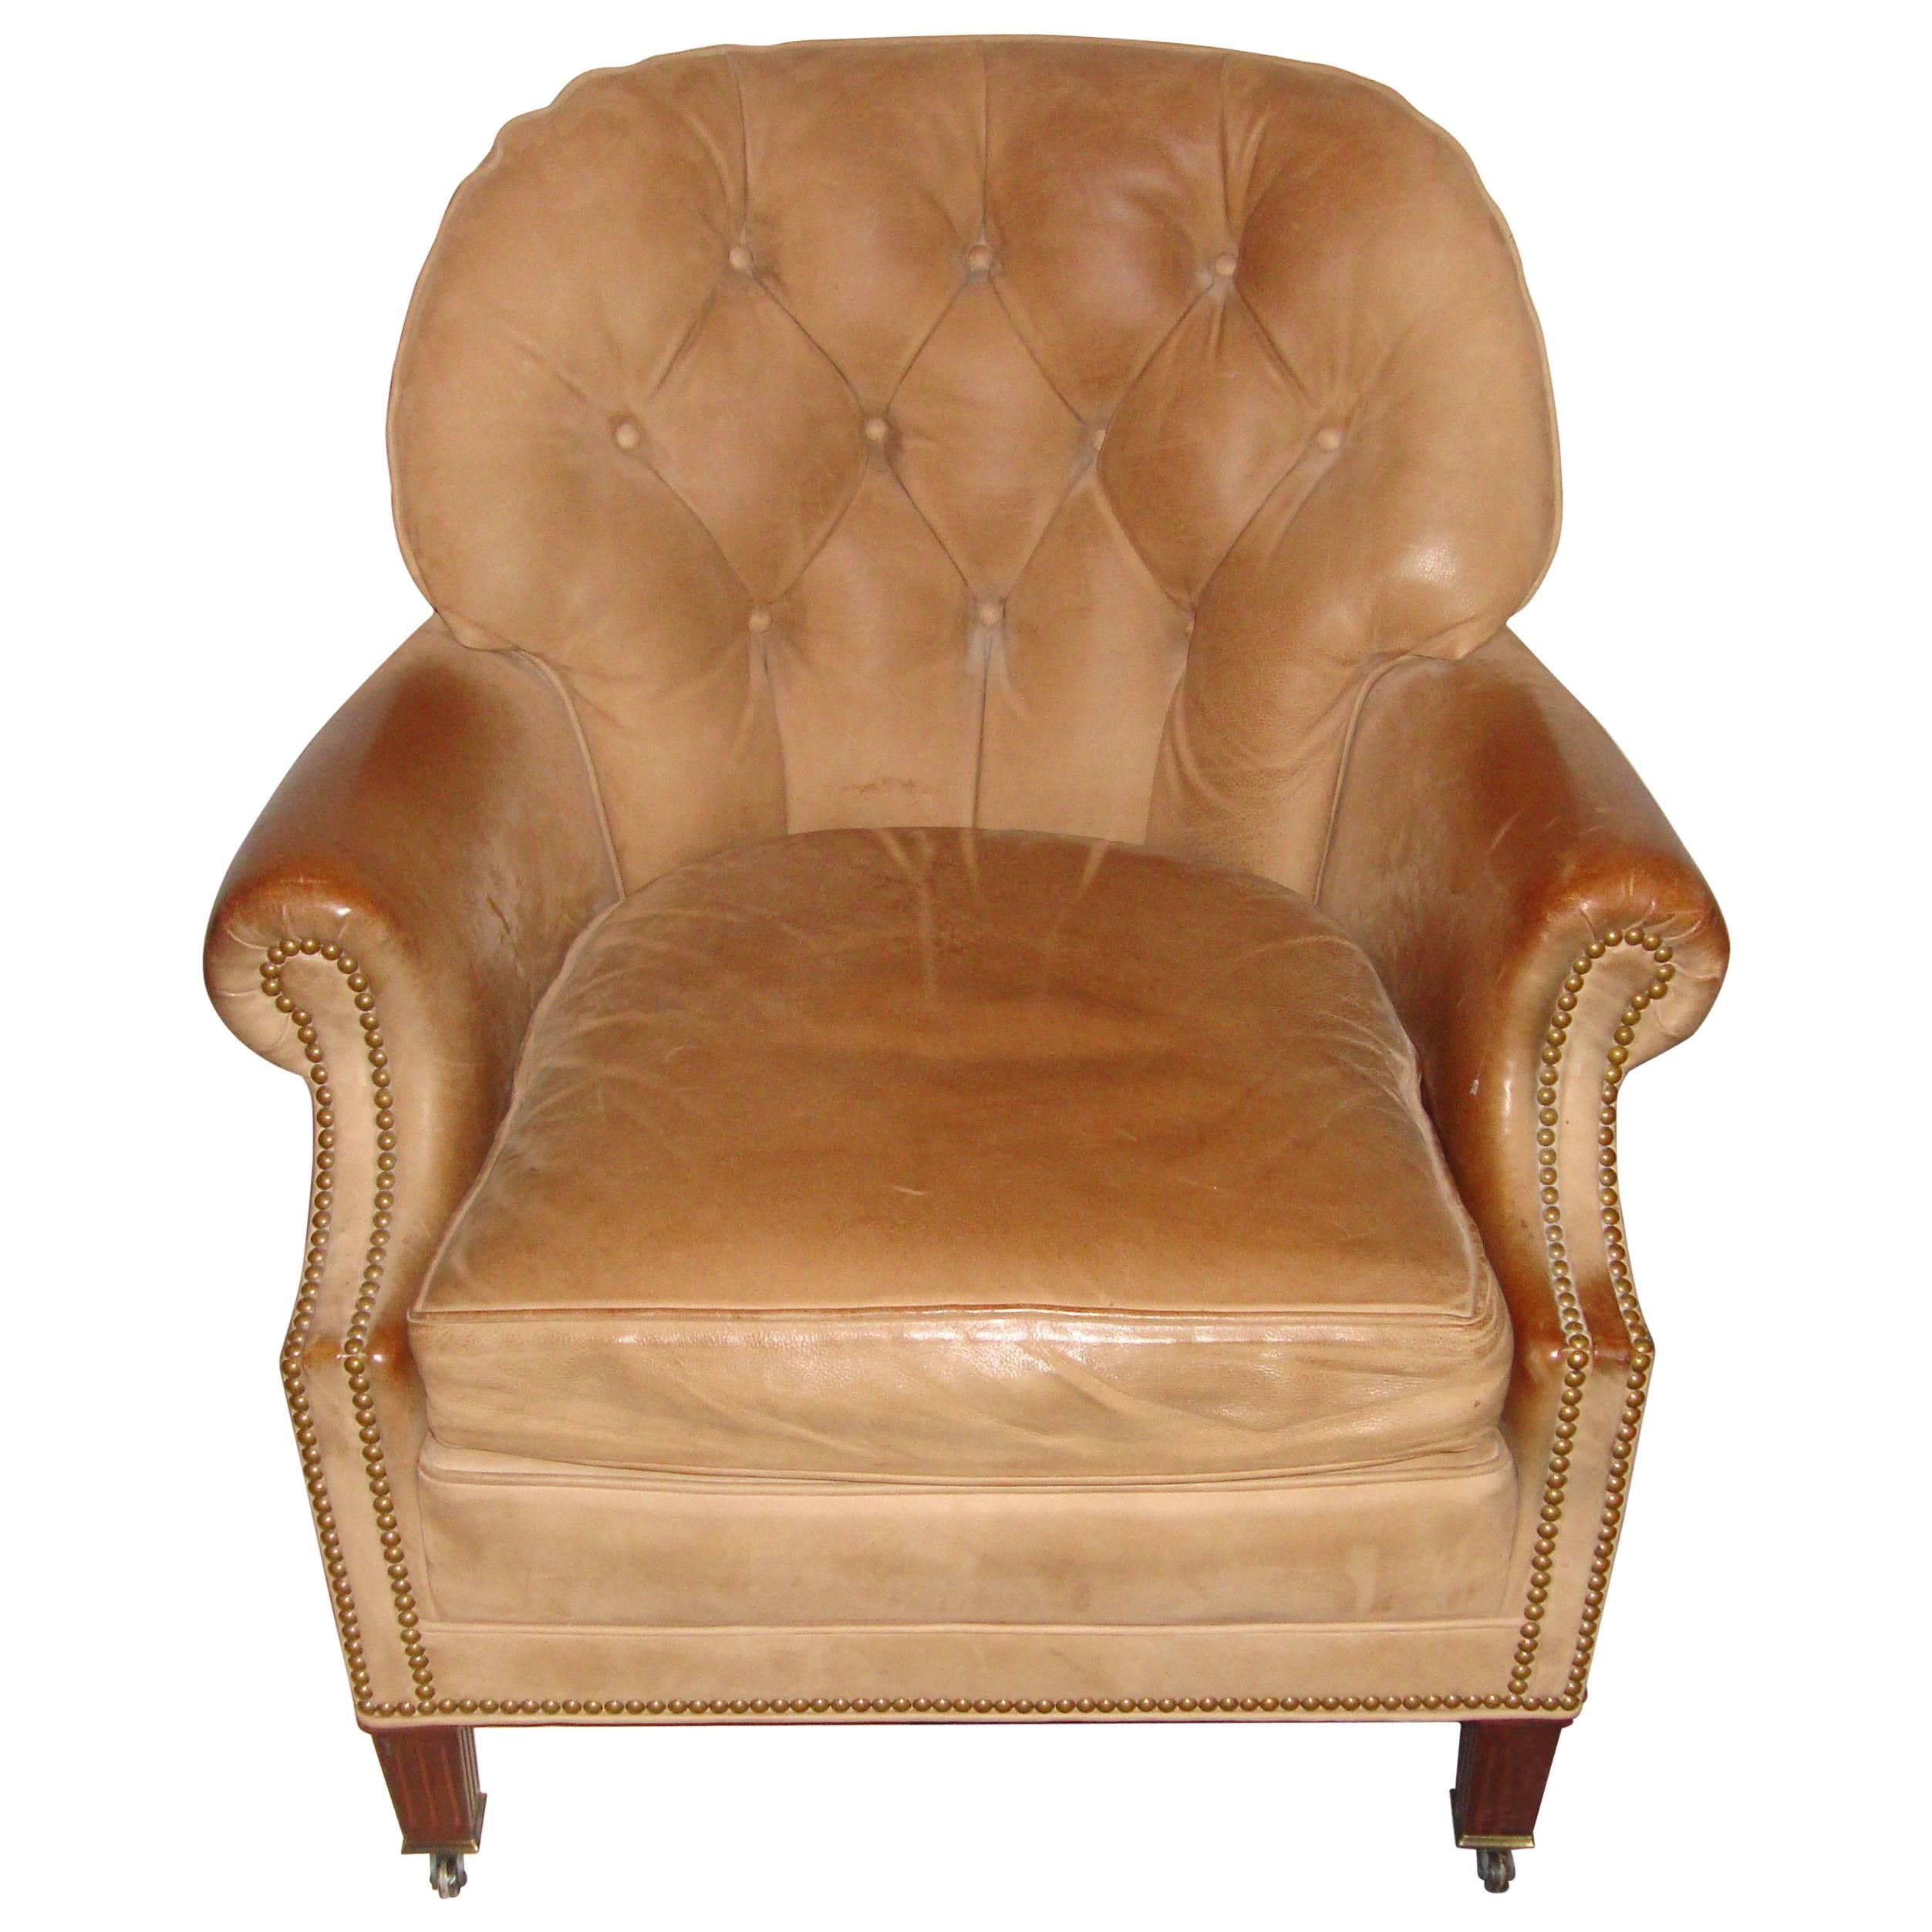 Hancock & Moore Leather Tufted Back with Nailhead Design Armchair